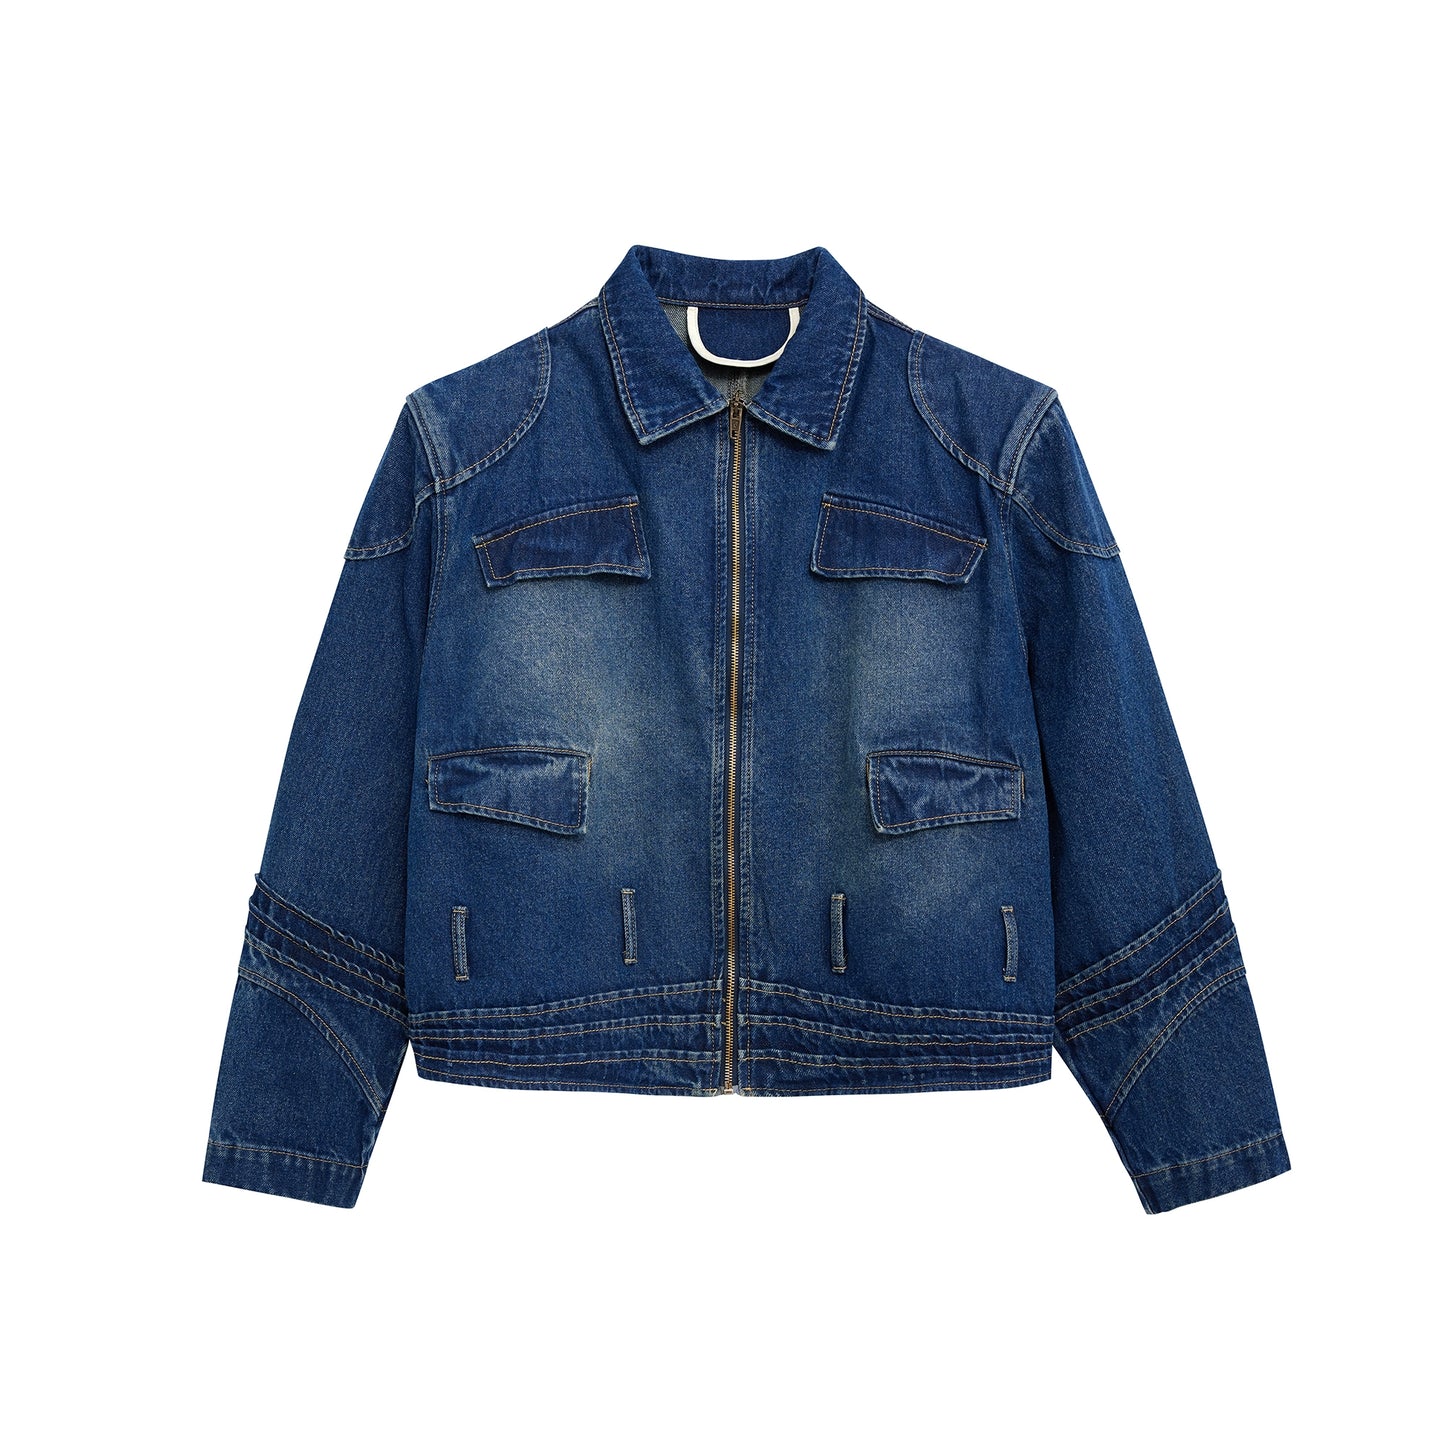 CulturE is a heavyweight niche deconstructed washed vintage denim jacket with a three-dimensional split silhouette jacket for men